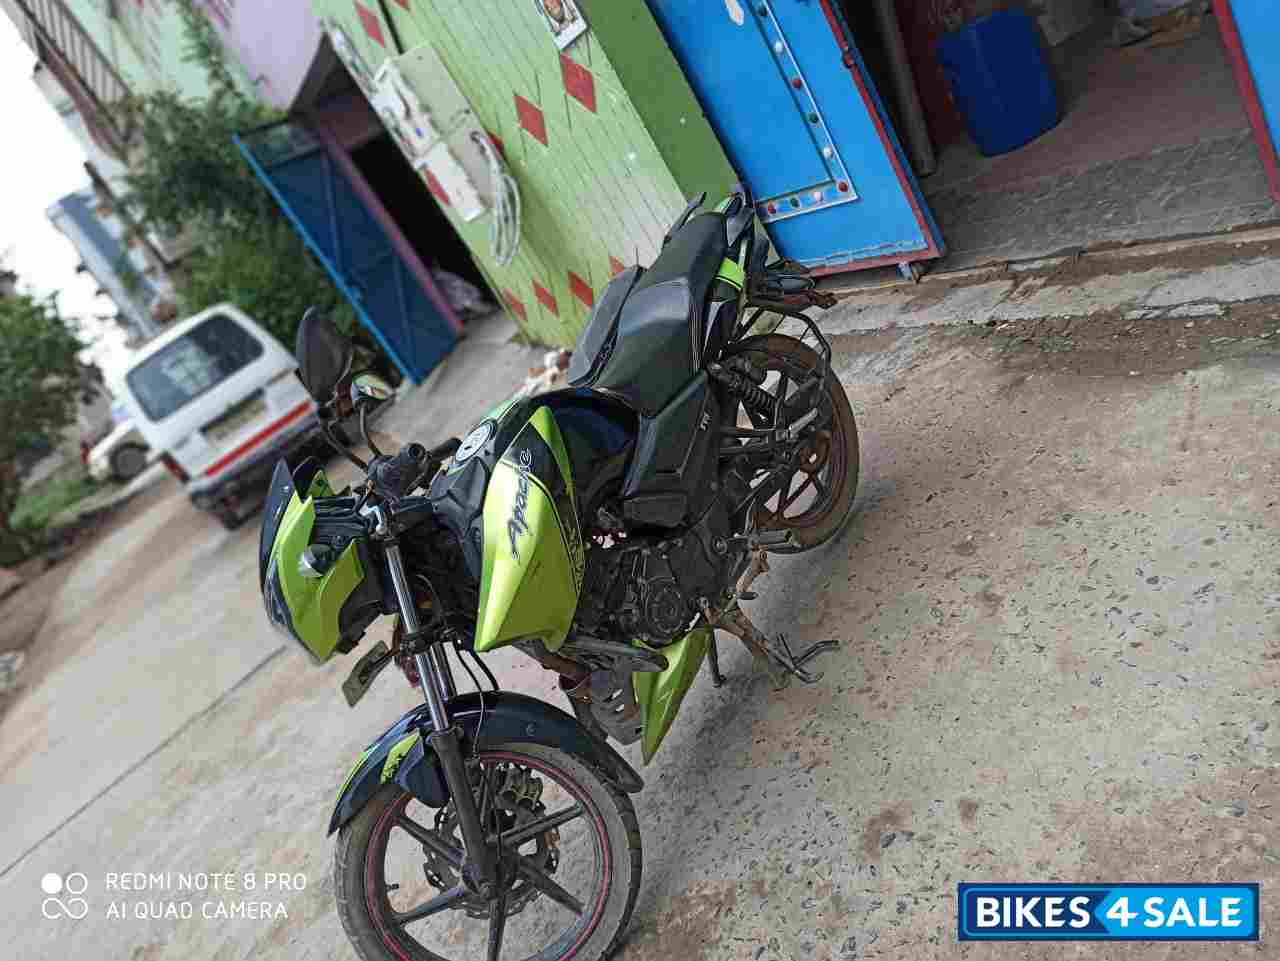 Used 14 Model Tvs Apache Rtr 160 For Sale In Patna Id Green Black Colour Bikes4sale